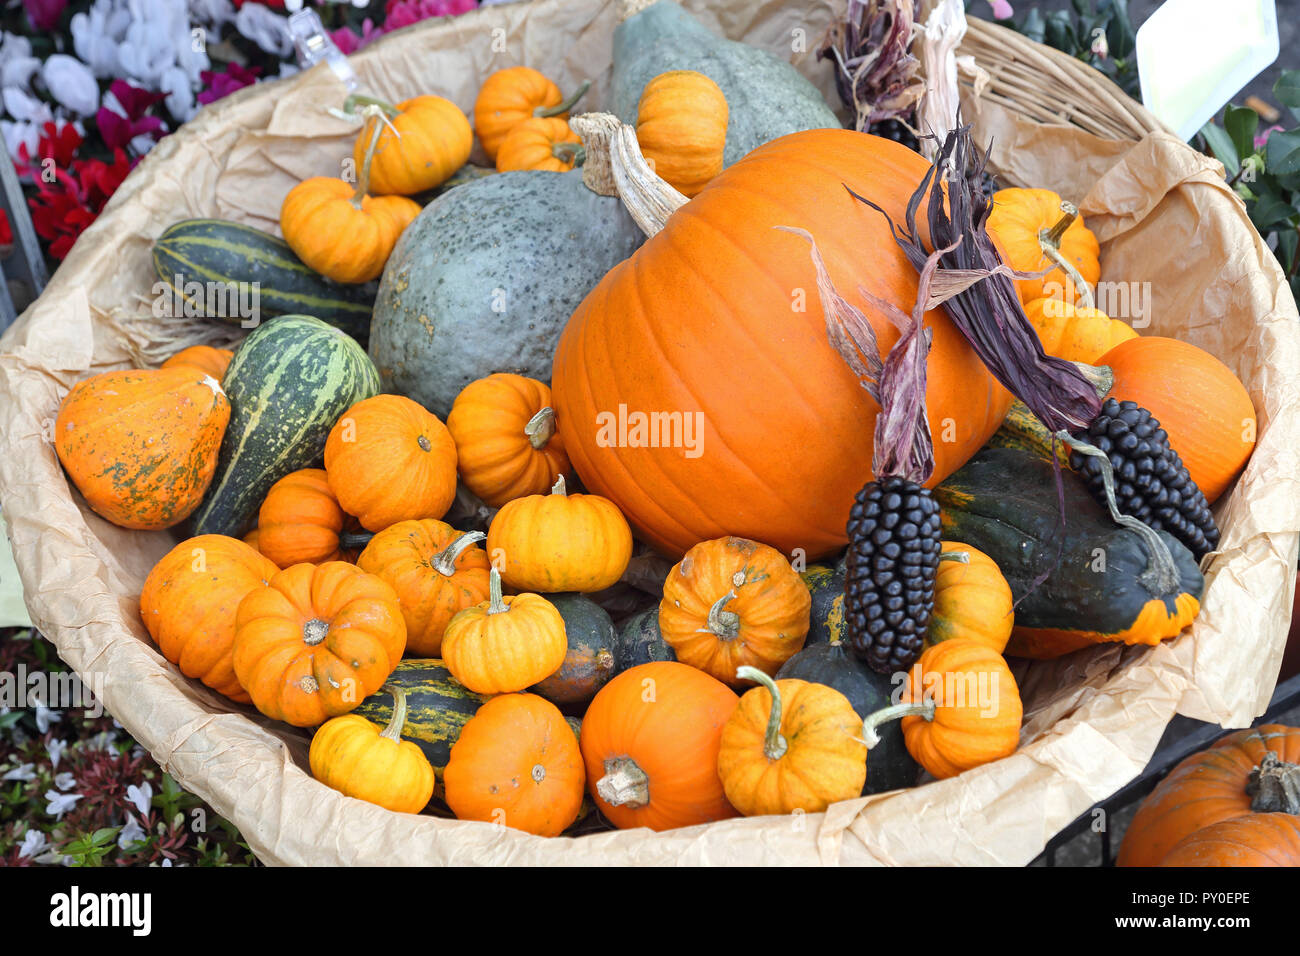 Pumpkins and Gourds for Halloween Natural Decoration in Basket Stock Photo